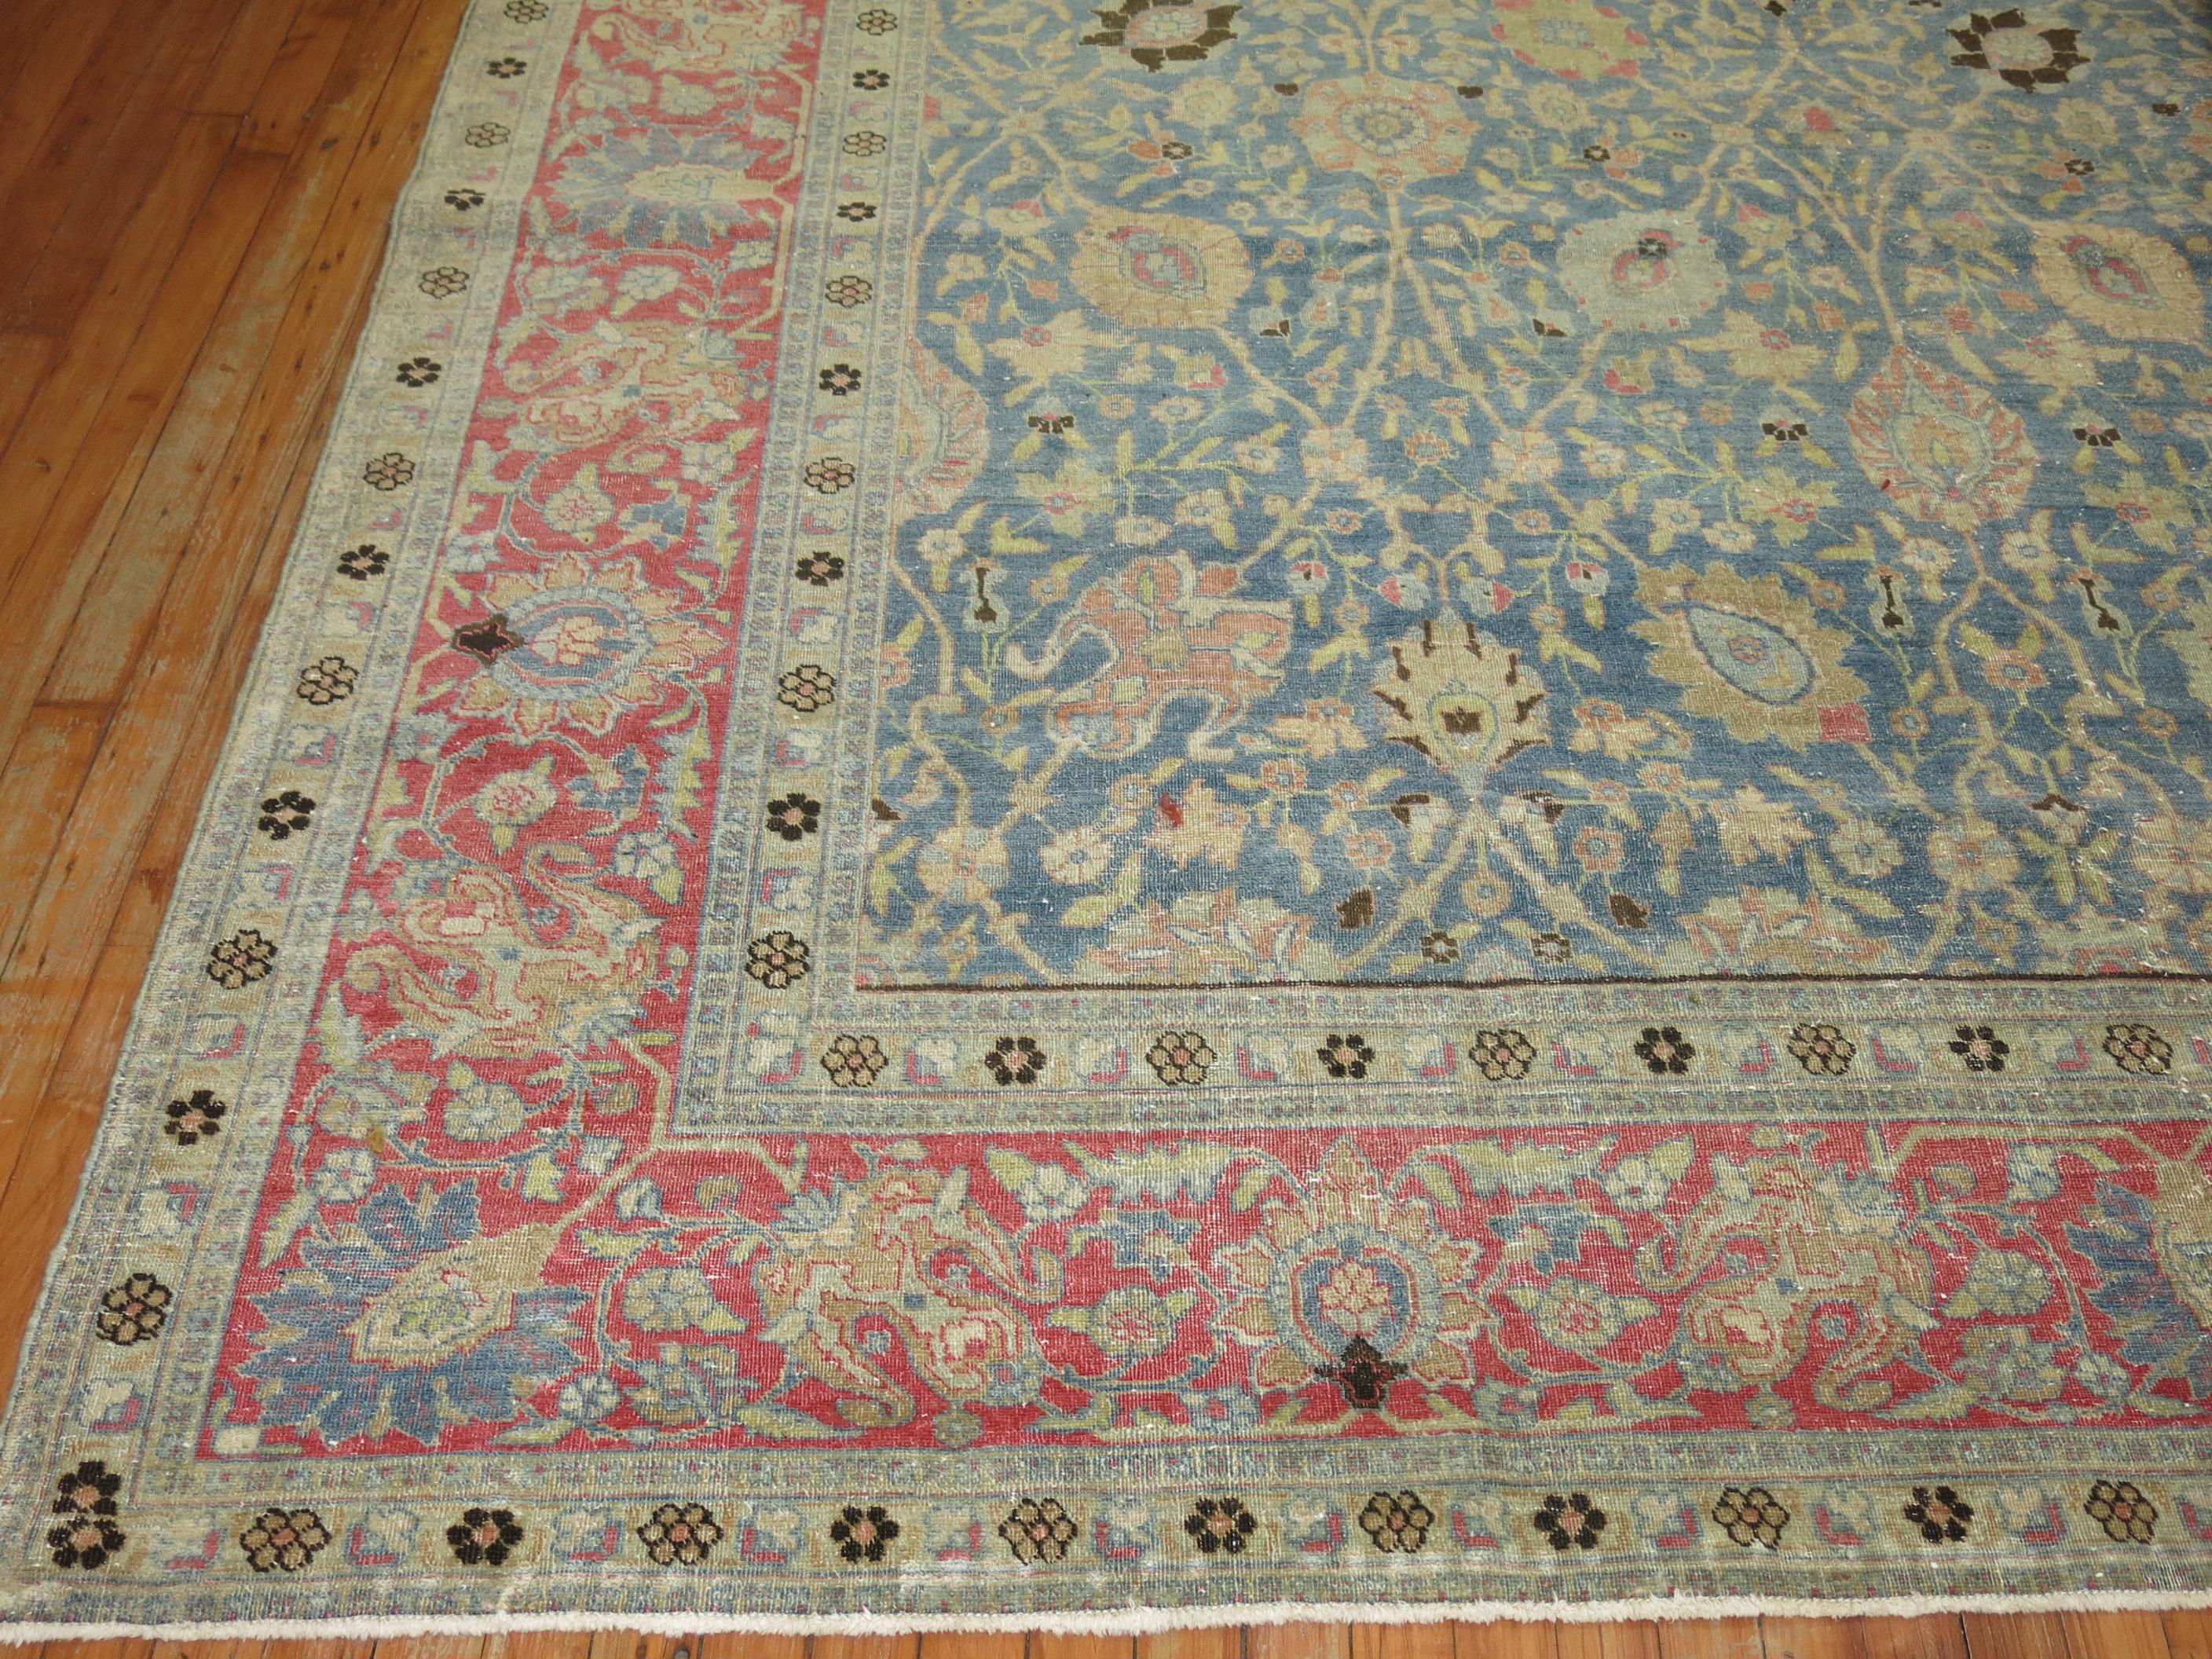 Sultanabad Square Antique Persian Tabriz Rug in Blues and Pink